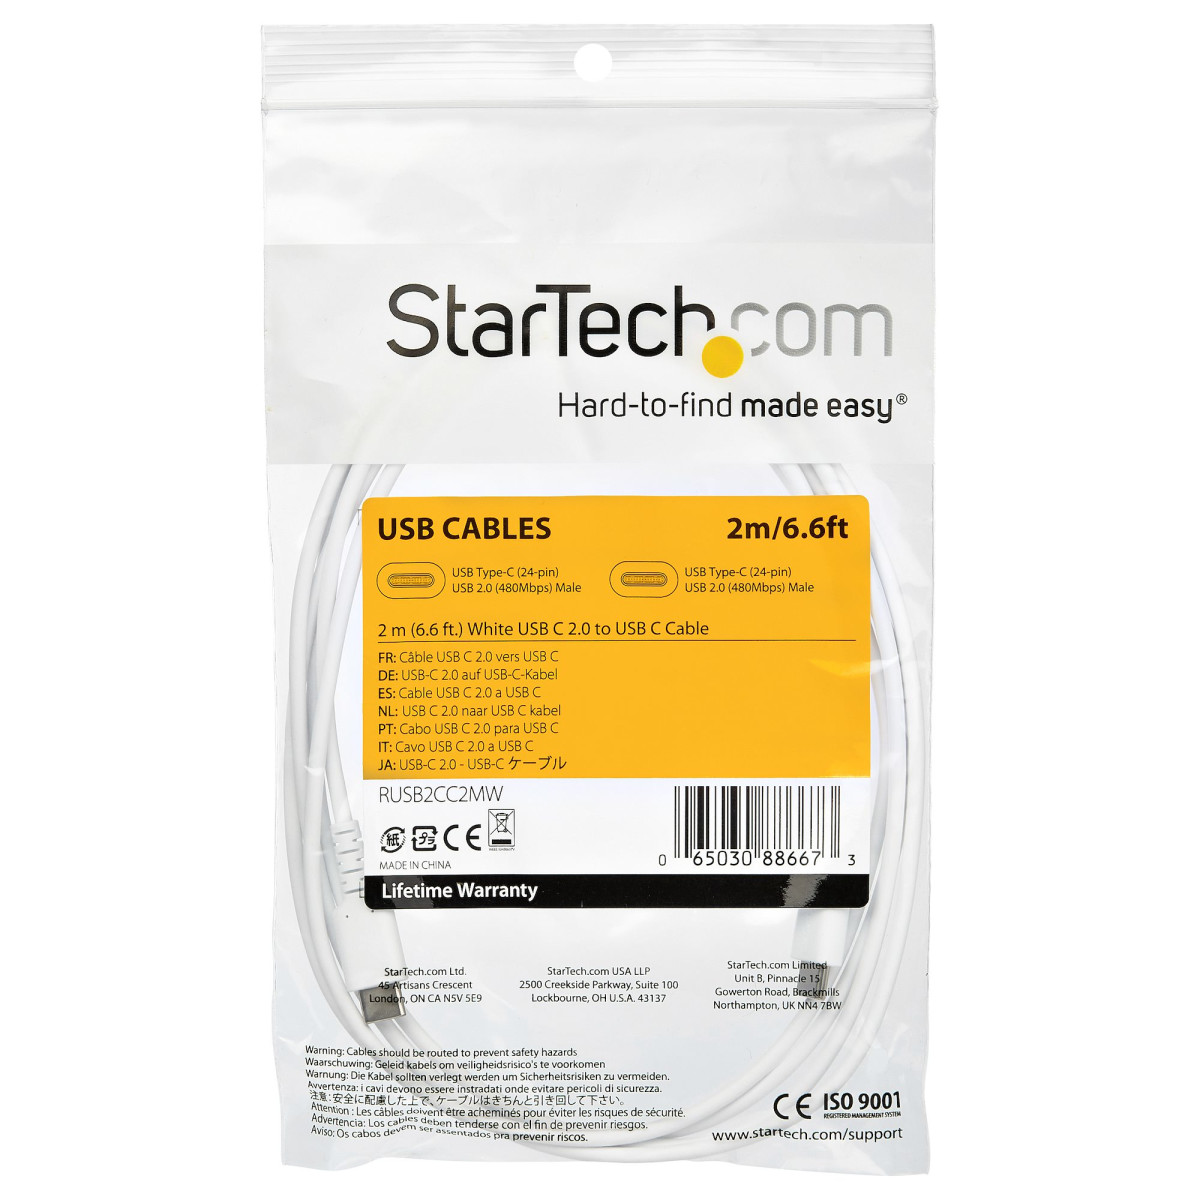 Cable - White USB C Cable 2m